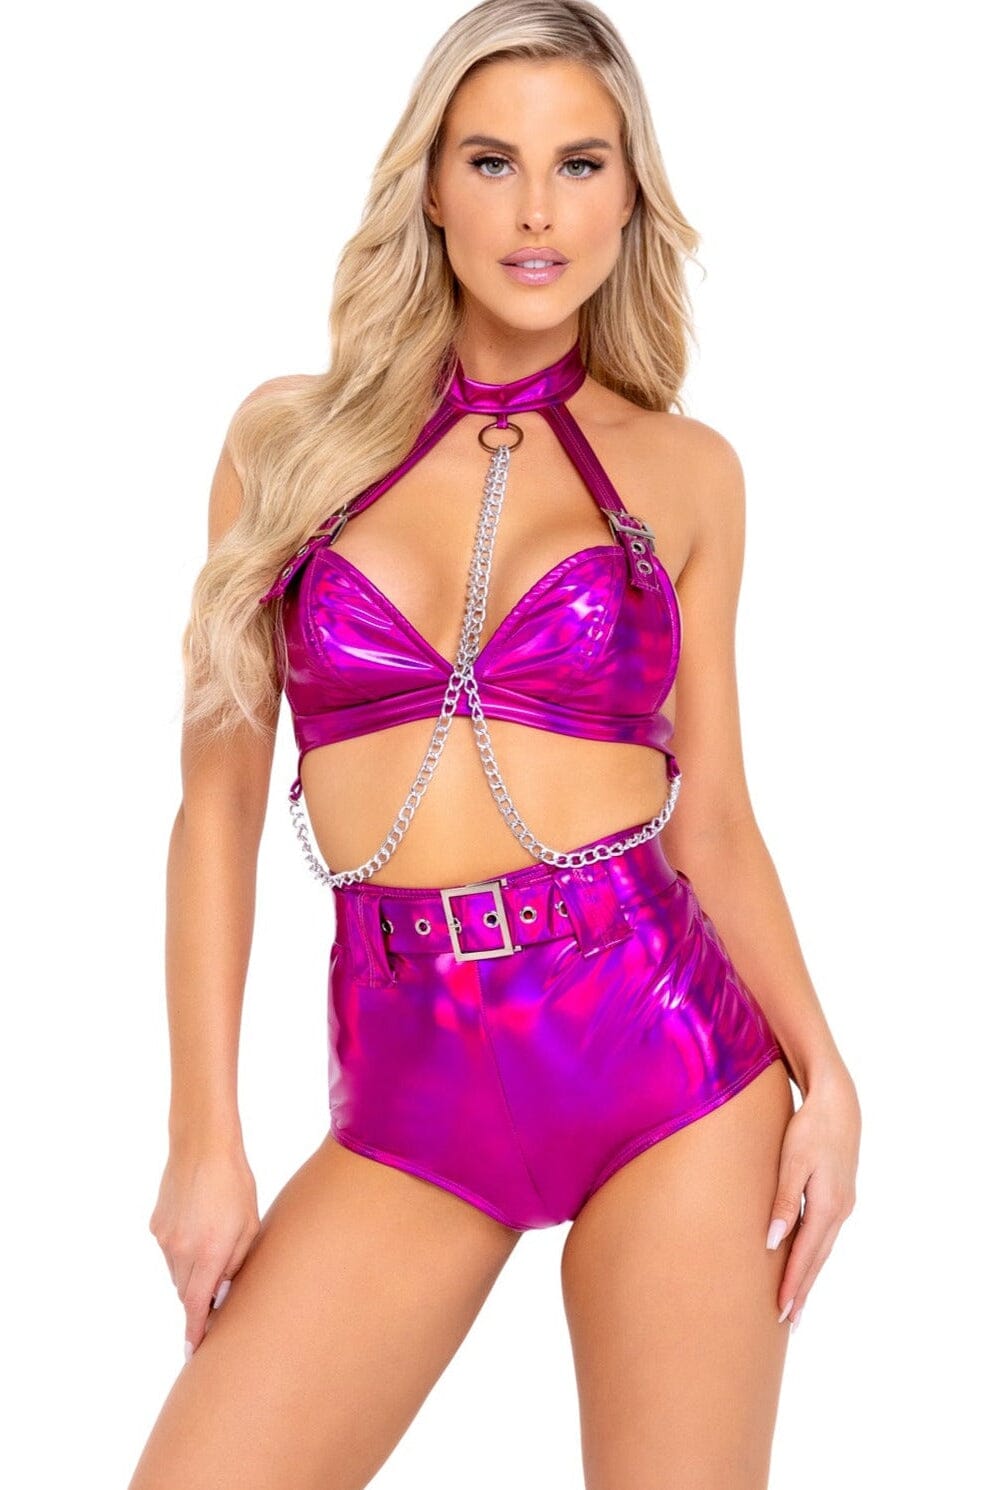 Holographic High-Waisted Shorts with Belt-Booty Shorts-Roma Dancewear-Fuchsia-L-SEXYSHOES.COM